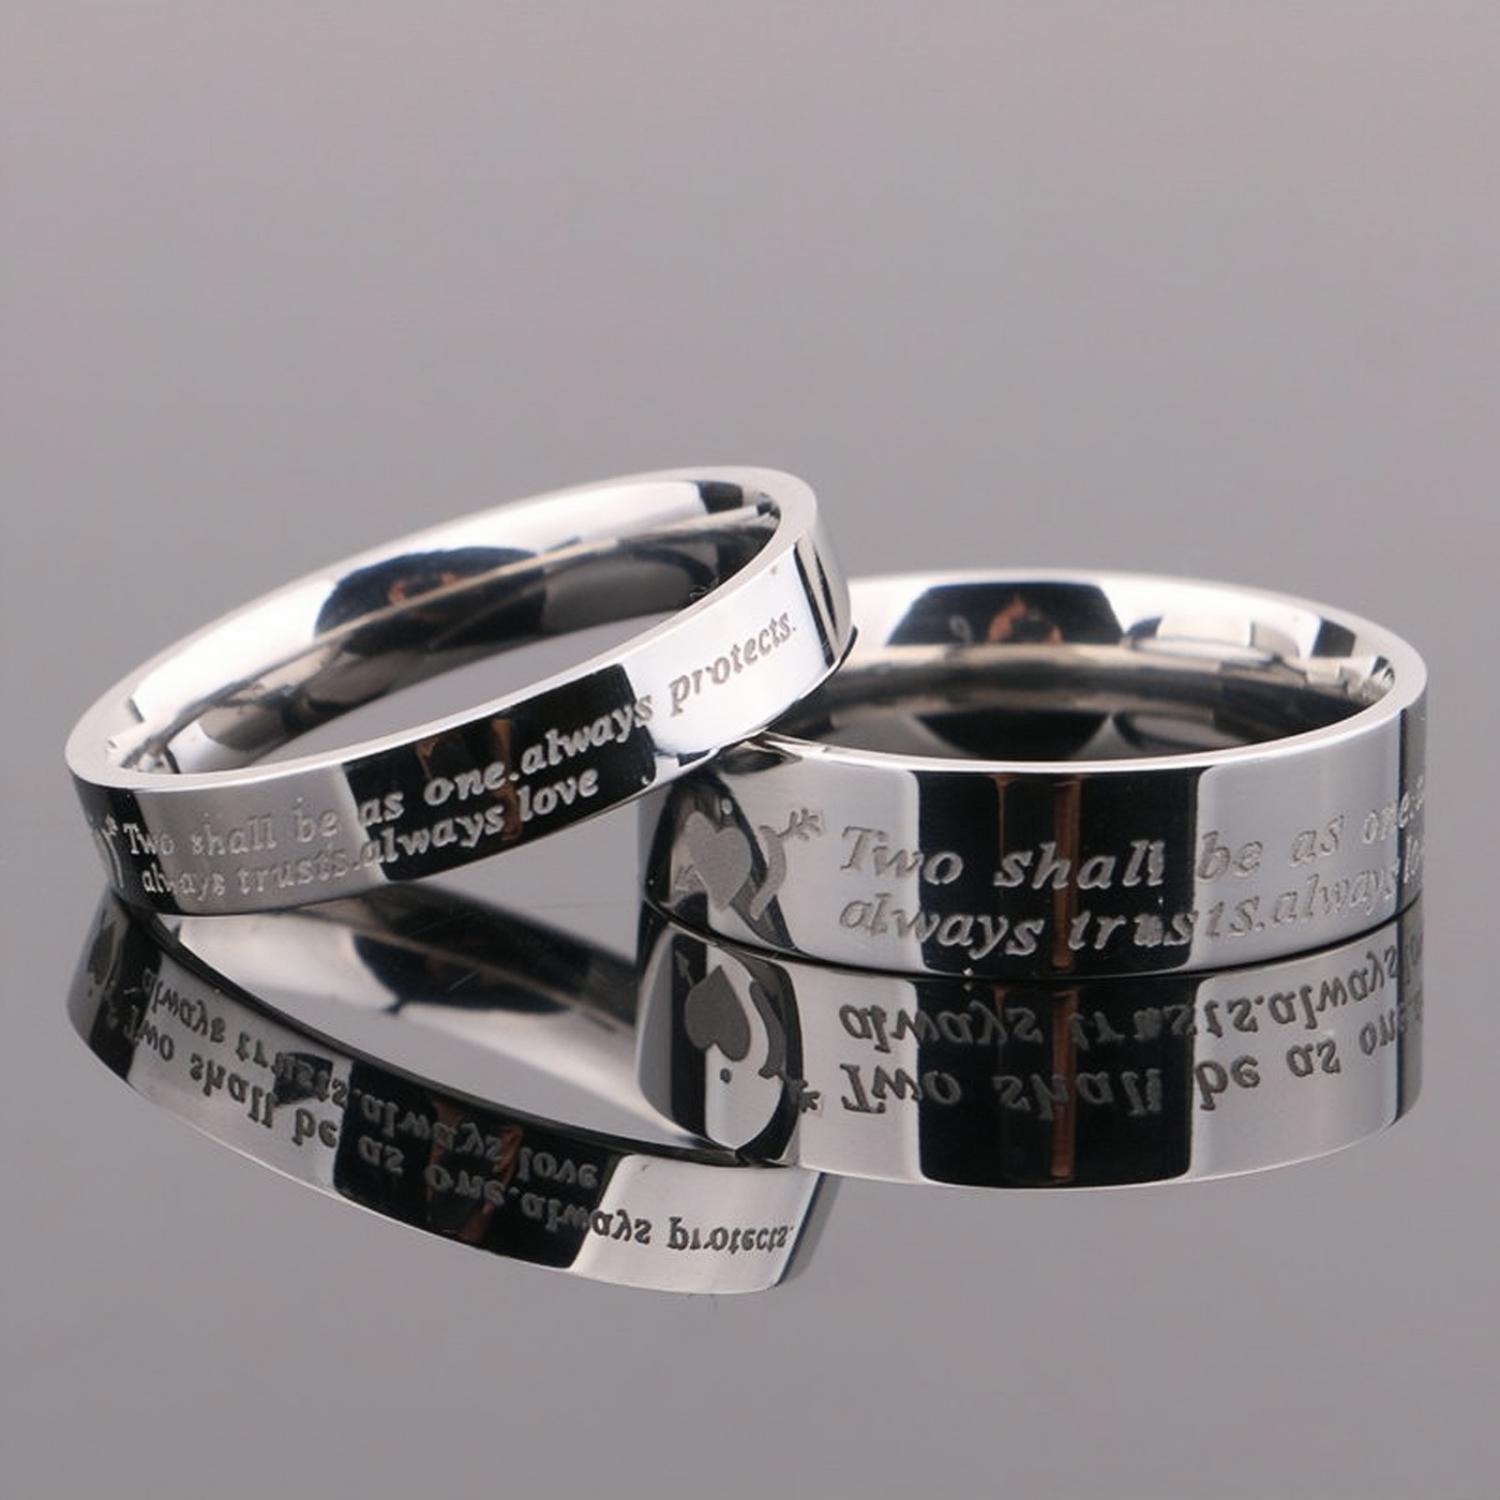 Two Shall Be As One Always Protects Always Trusts Always Promise Rings In Titanium - CoupleSets